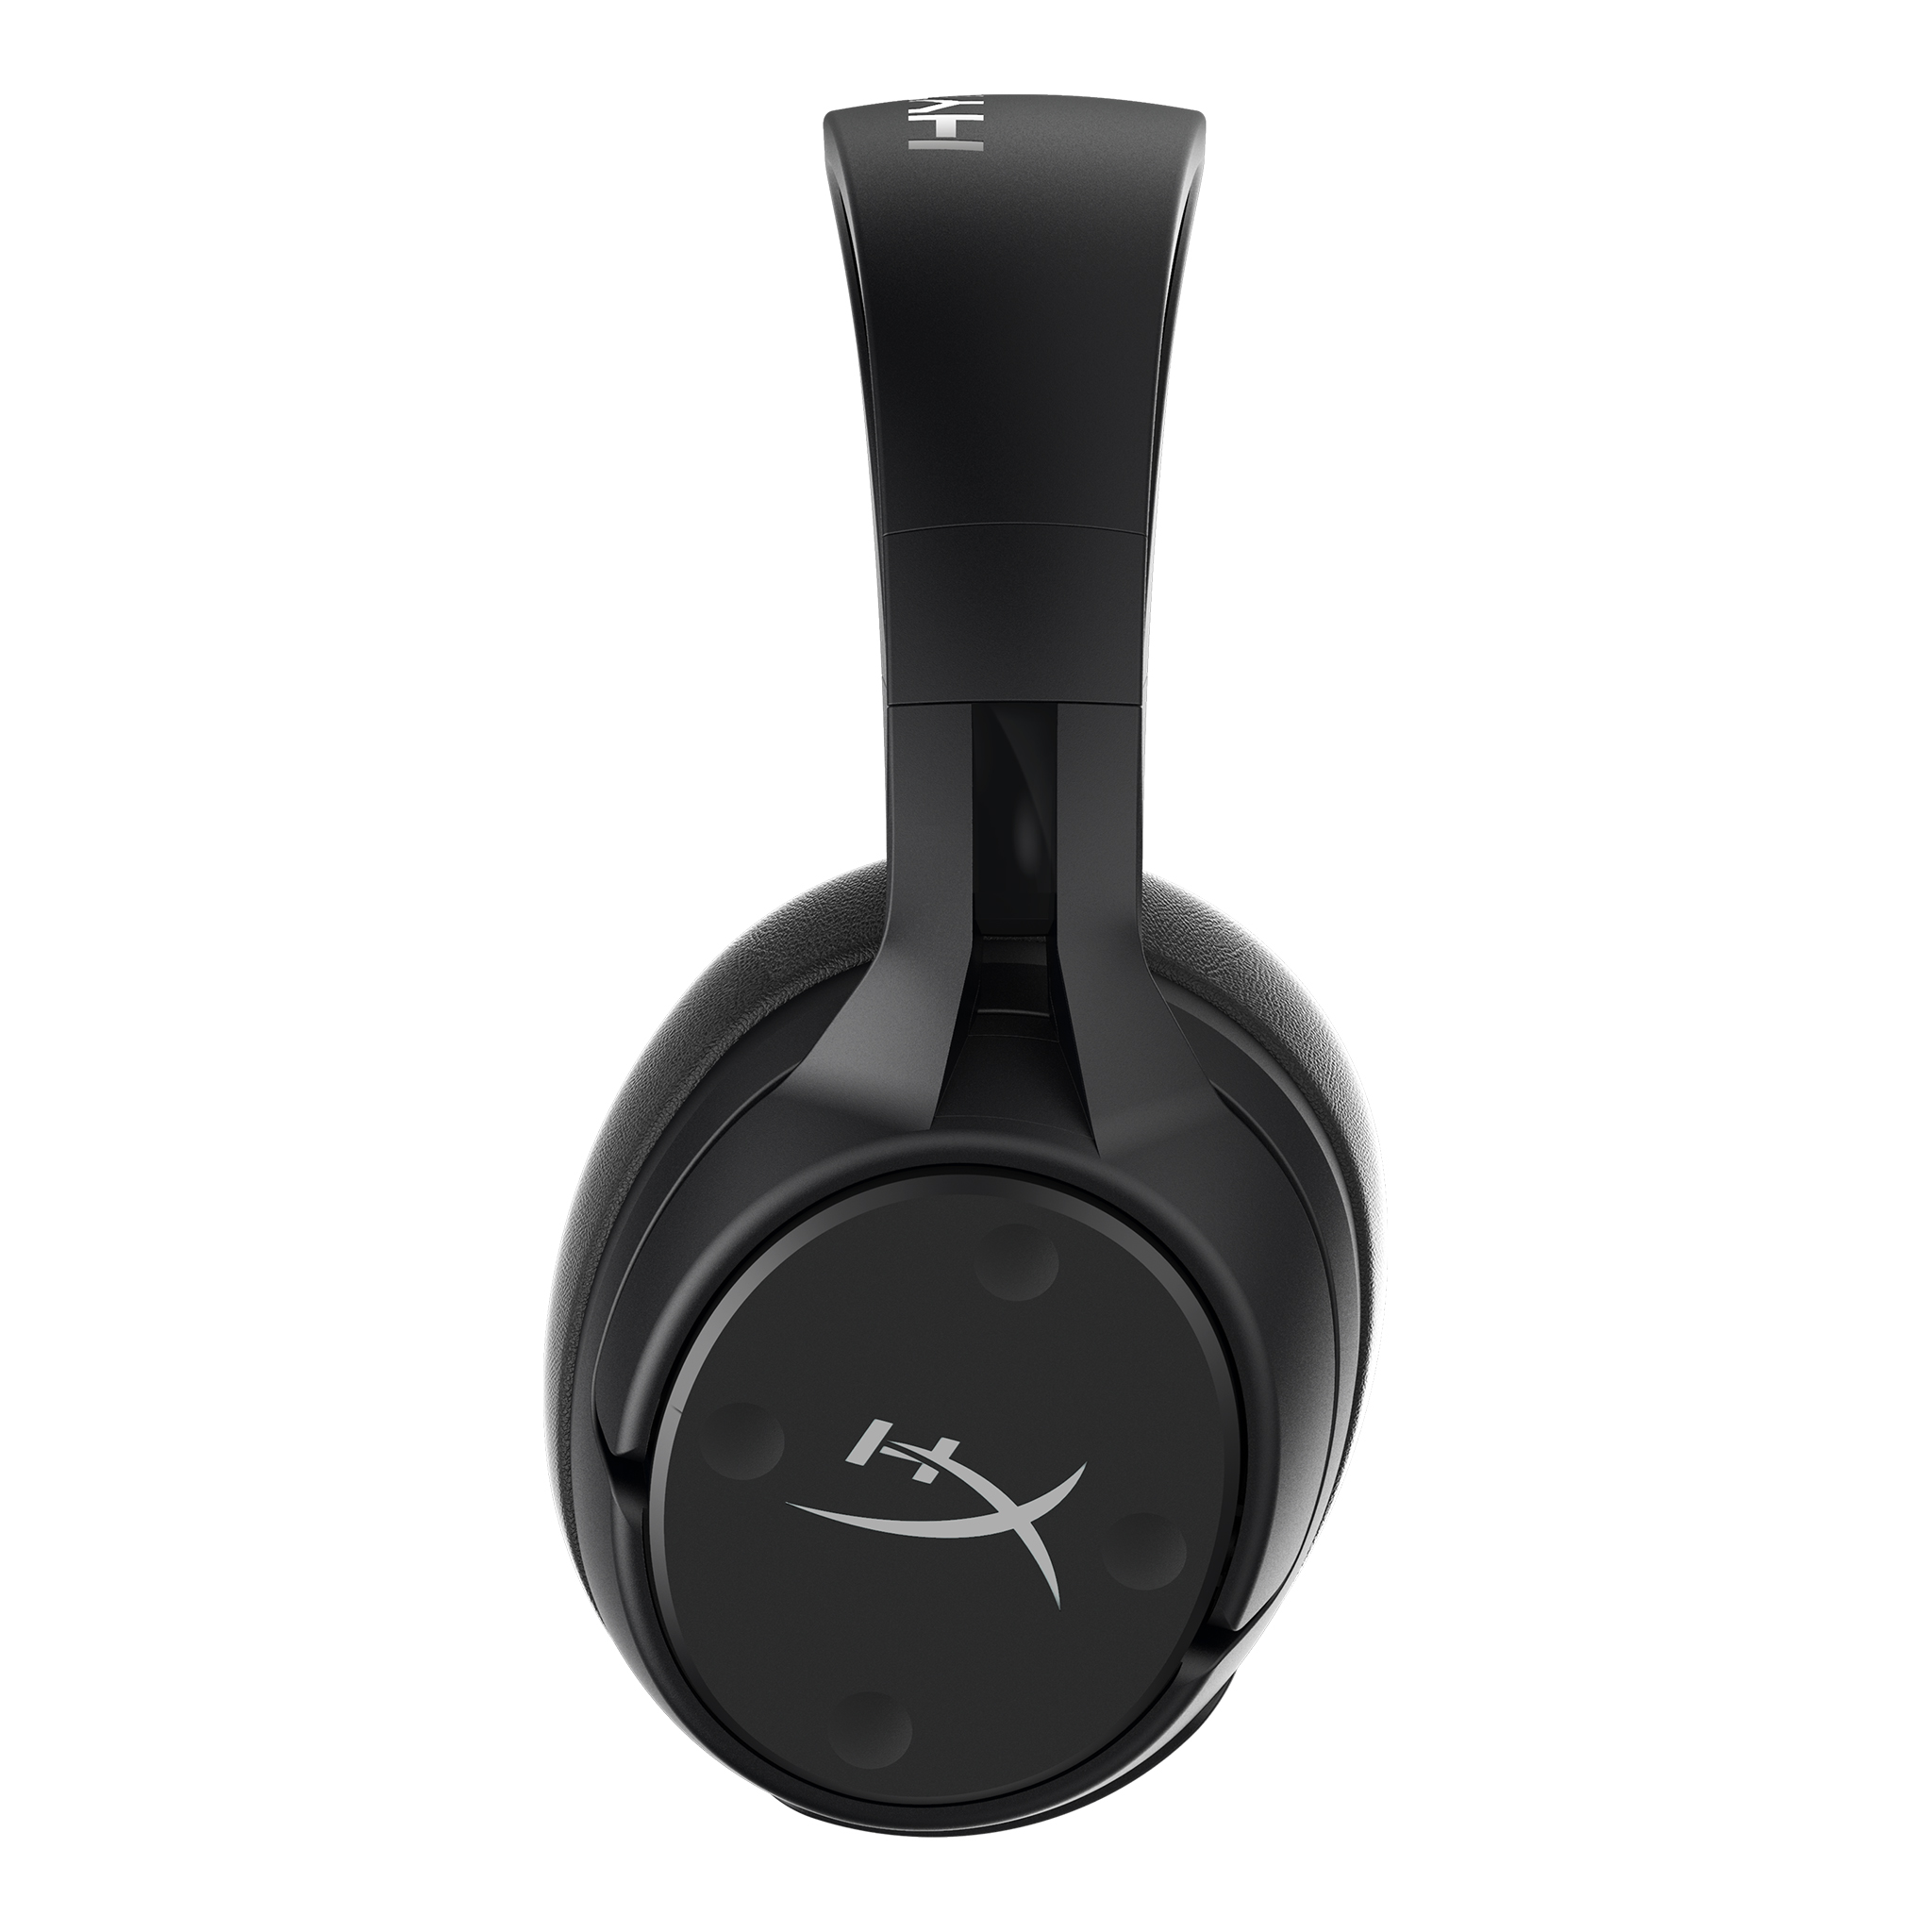 The Hyperx Cloud Flight S With Wireless Qi Charging Is Now Available Legit Reviews